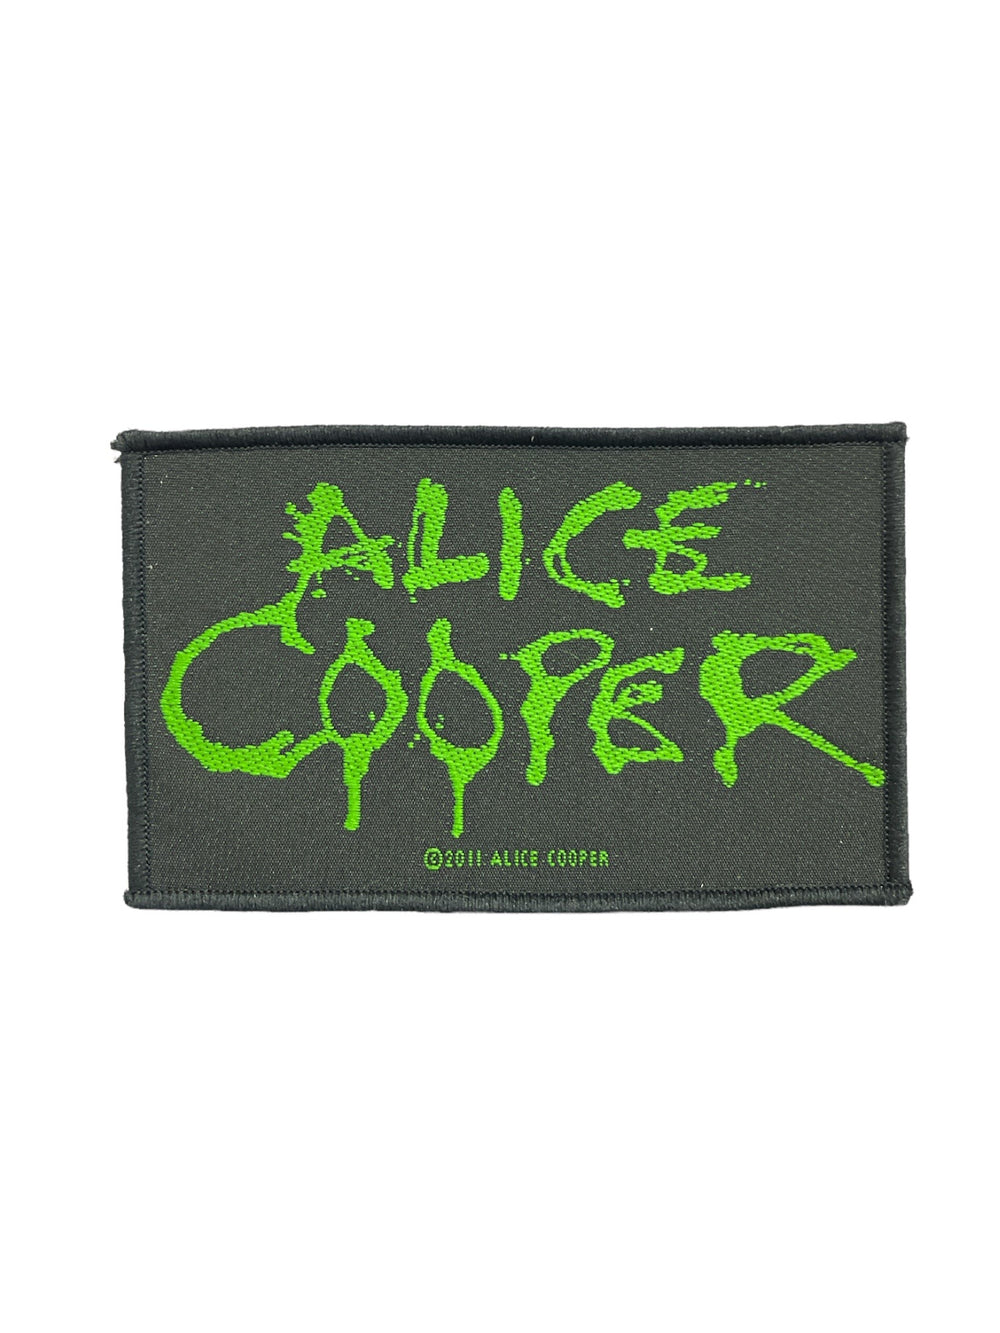 Alice Cooper Eyes Logo Official Woven Patch Brand New